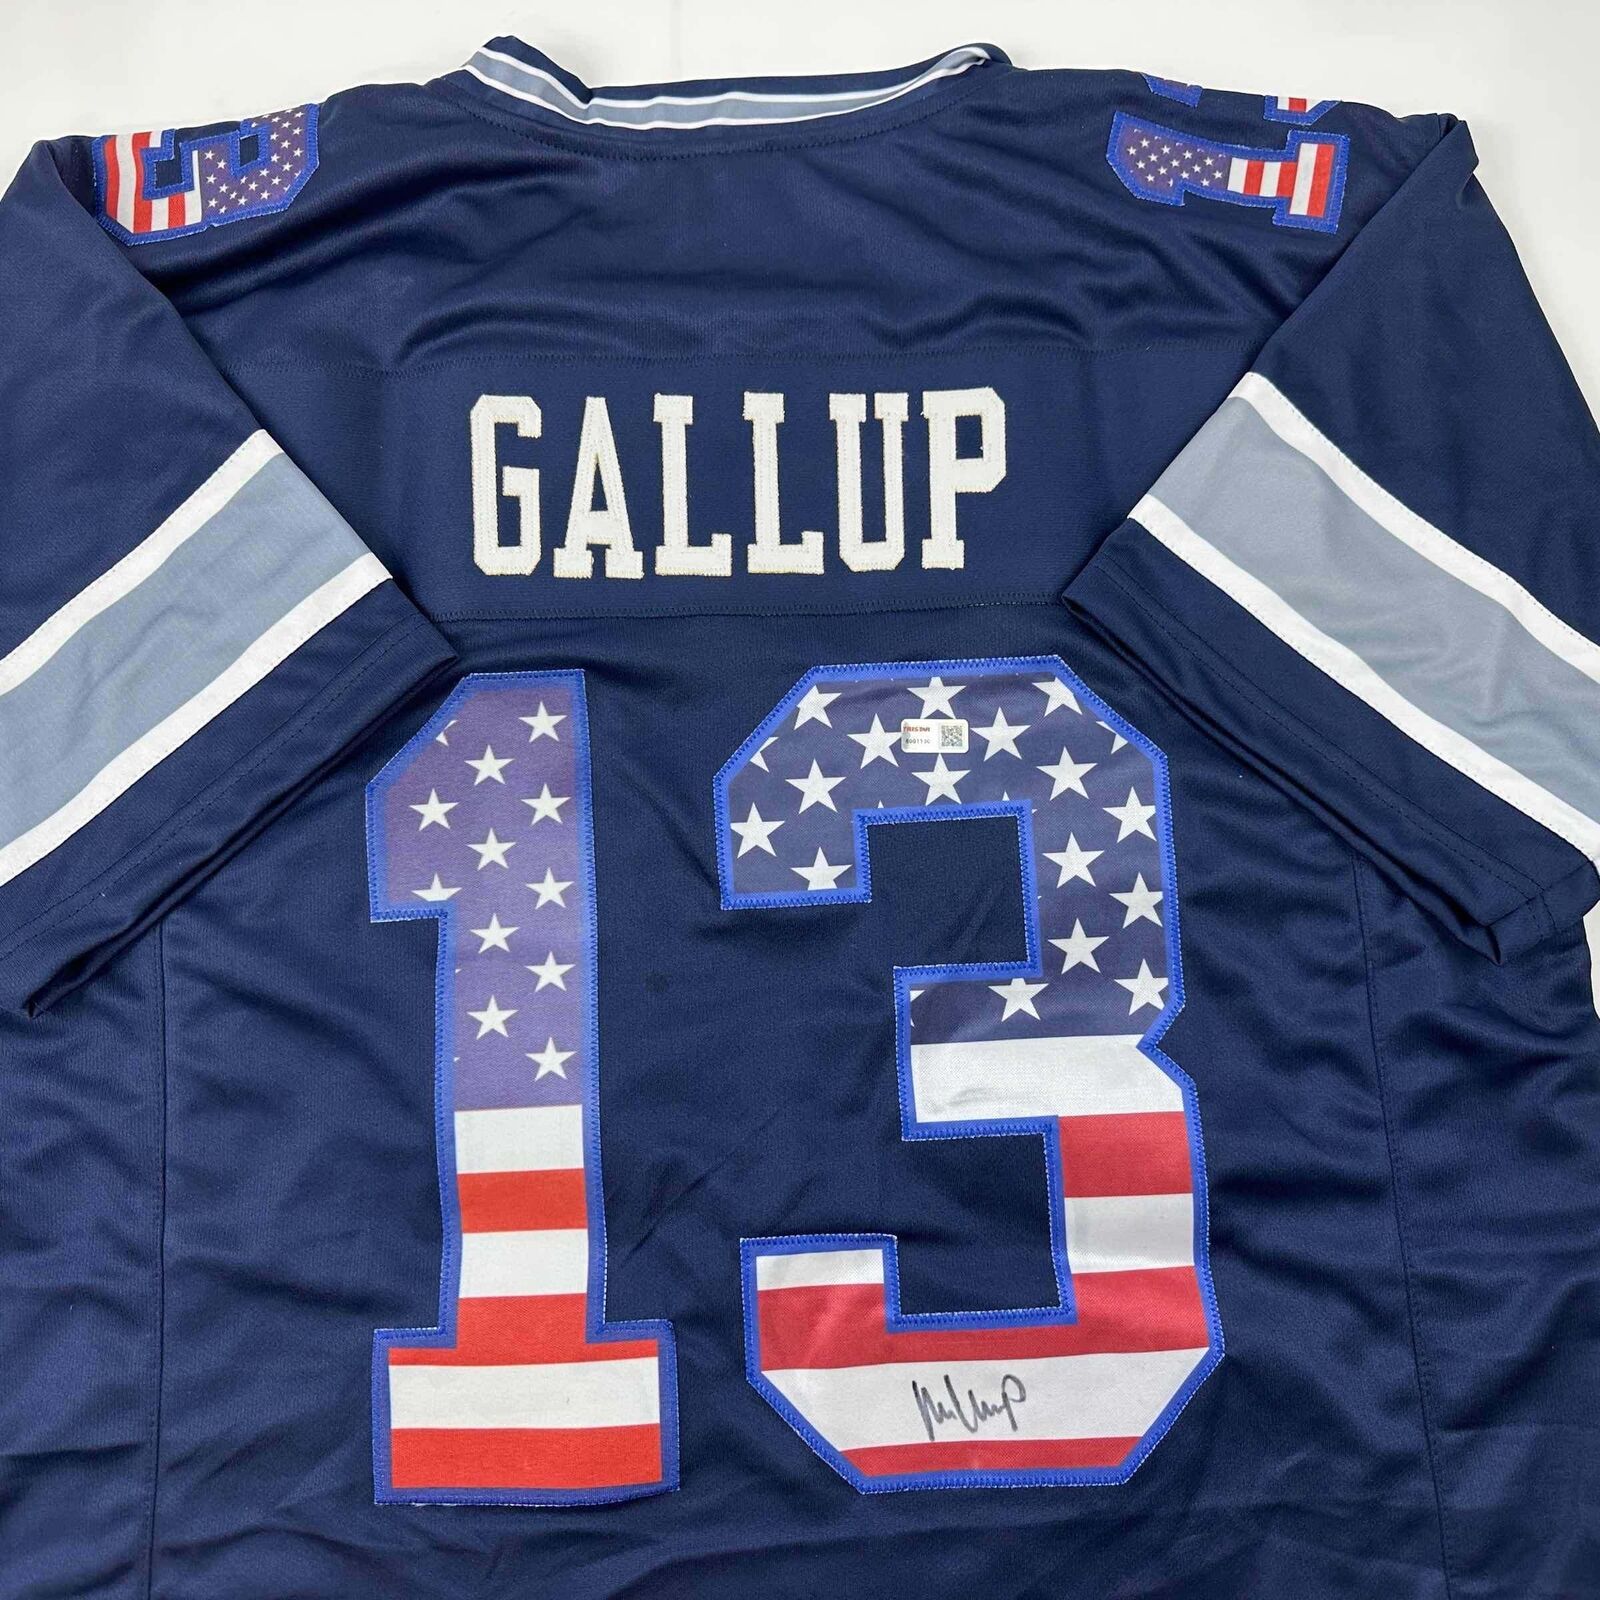 Autographed/signed Michael Gallup Dallas Blue Football Jersey 